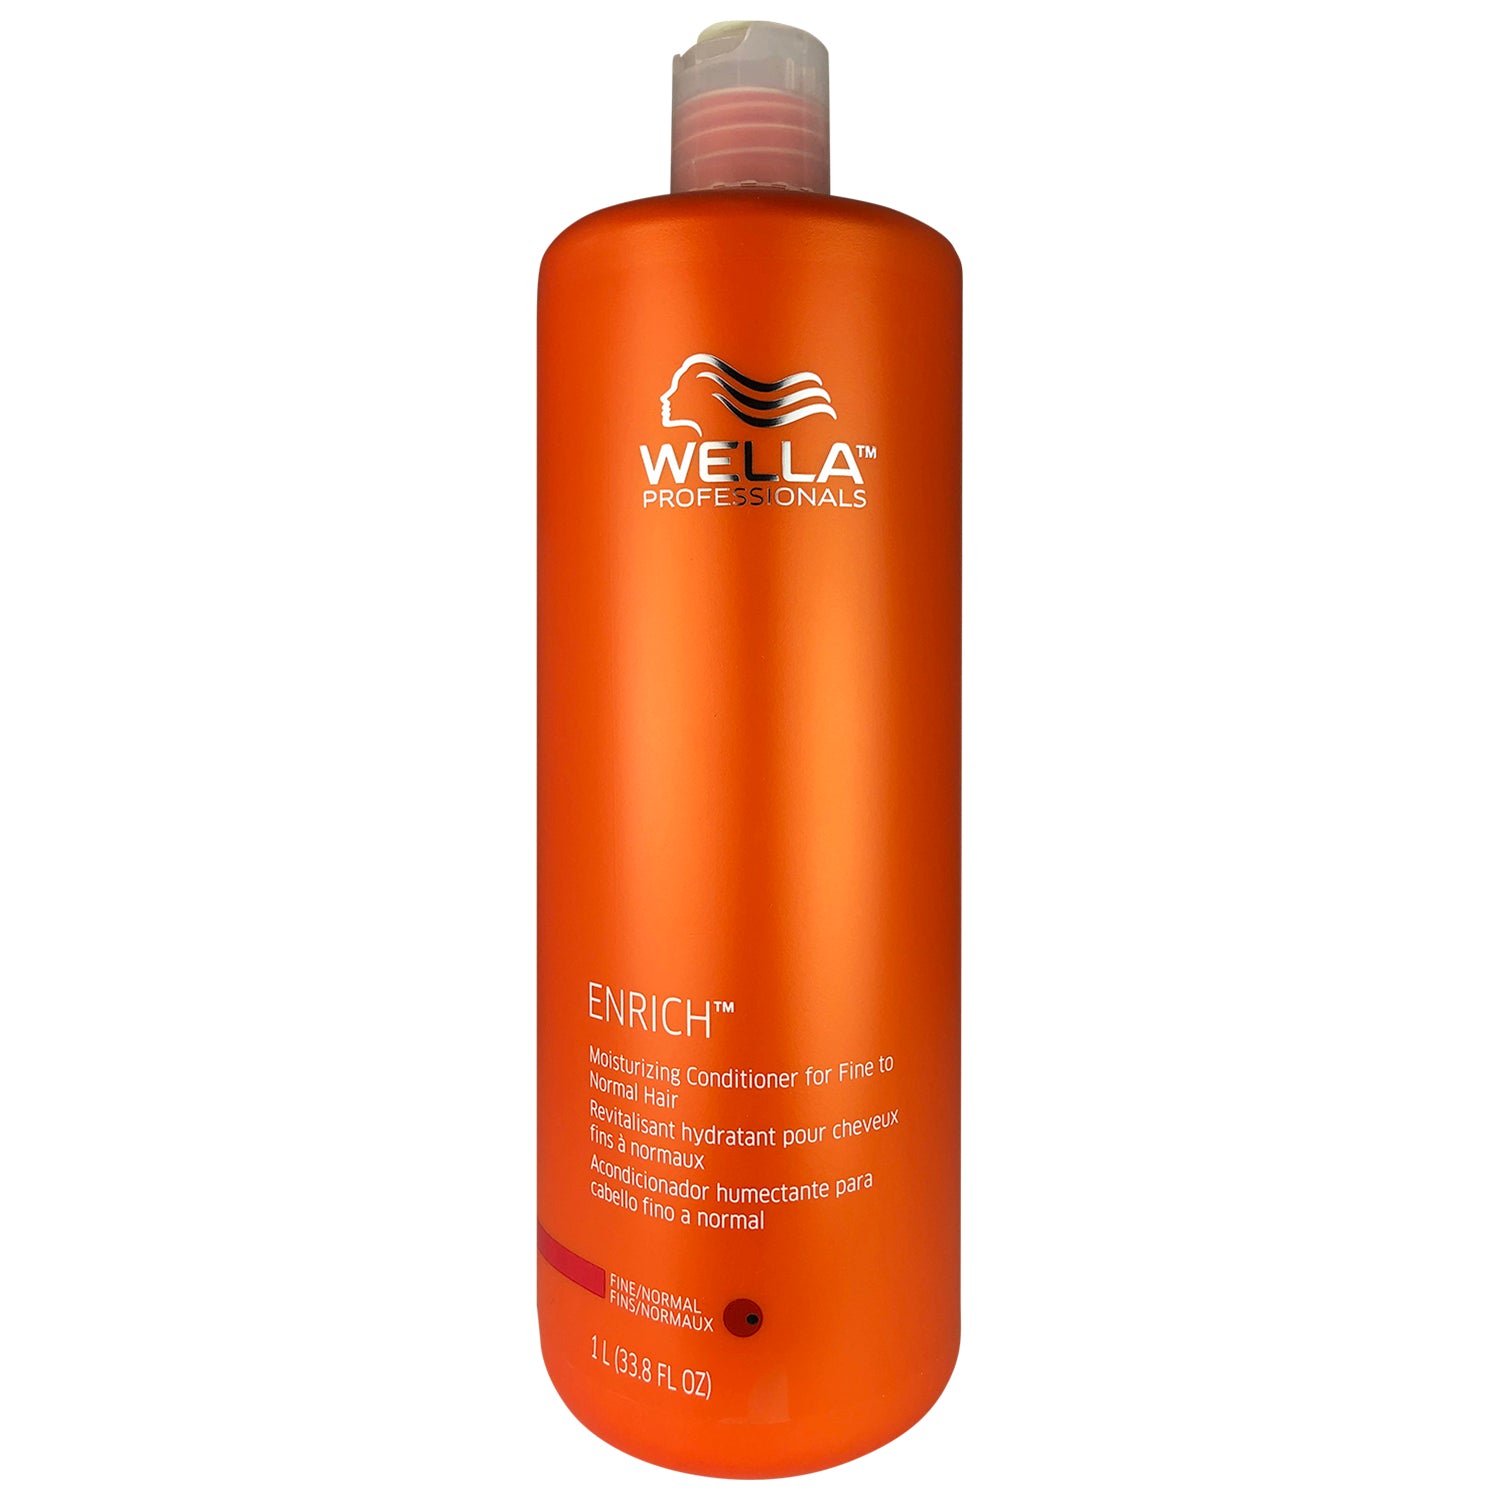 Wella Enrich Moisturizing Conditioner for Fine to Normal Hair